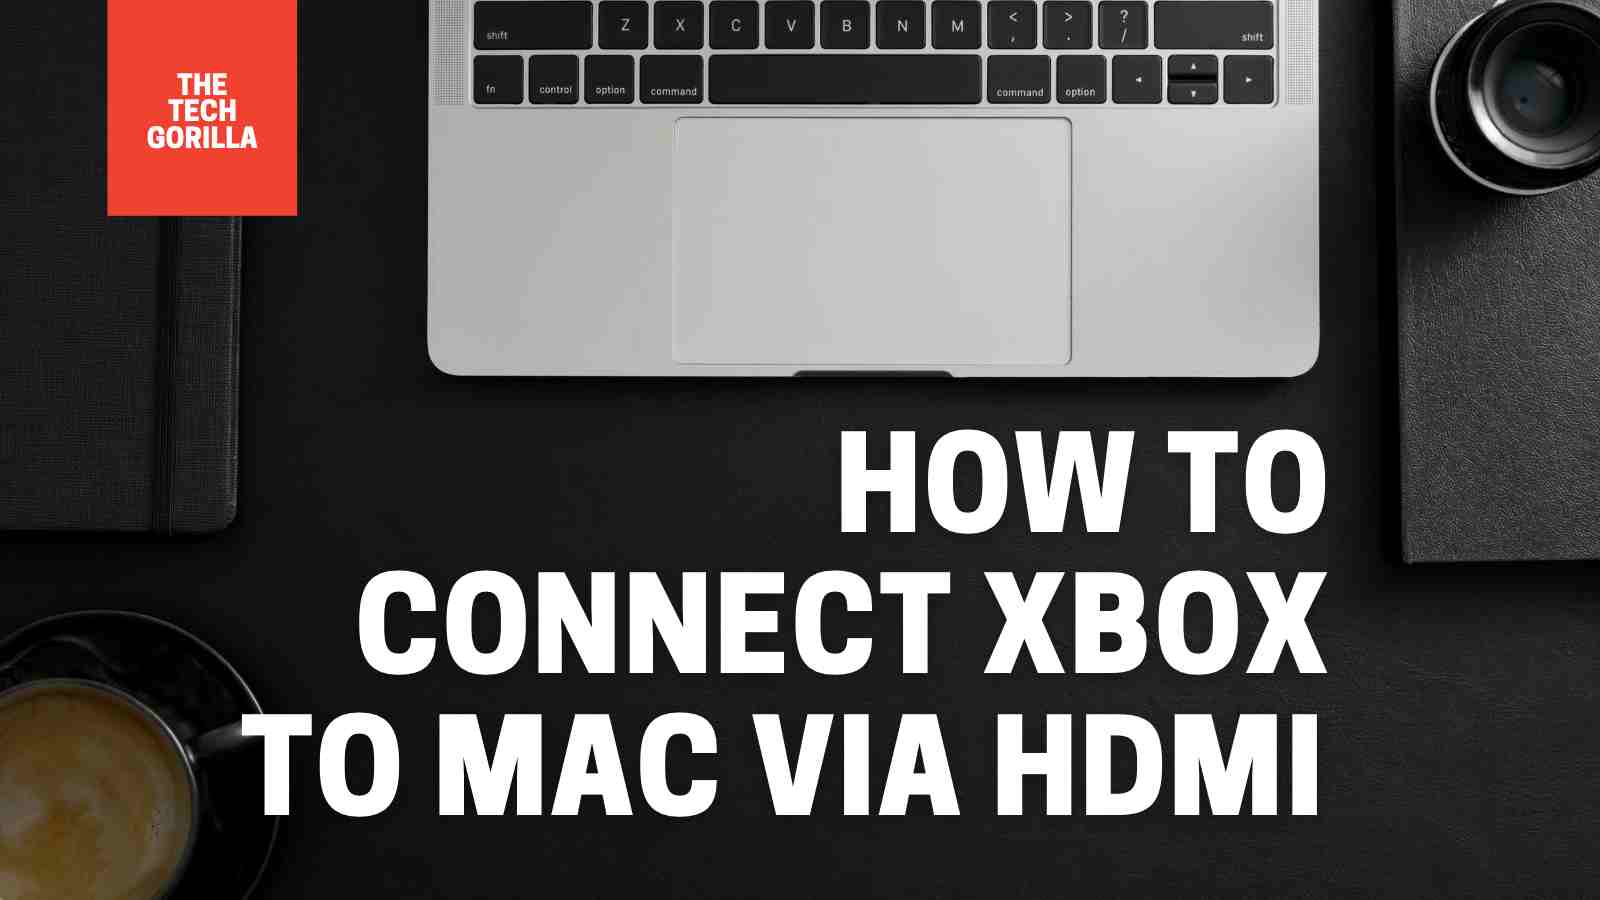 How to connect Xbox to Mac with HDMI